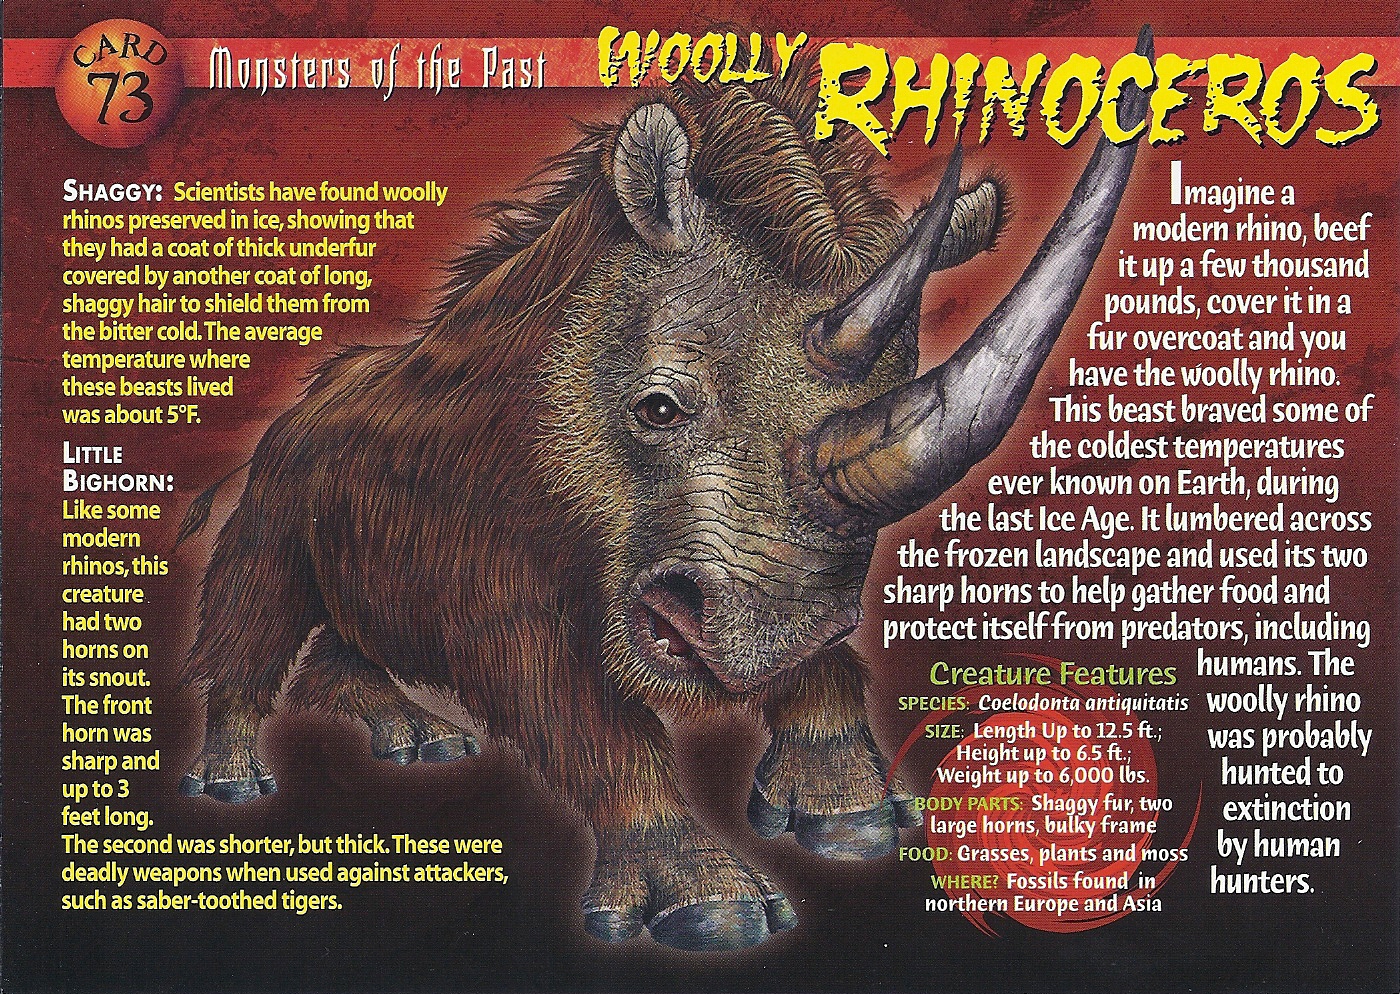 http://vignette1.wikia.nocookie.net/wierdnwildcreatures/images/e/e9/Wooly_Rhinoceros_front.jpg/revision/latest?cb=20130823022325